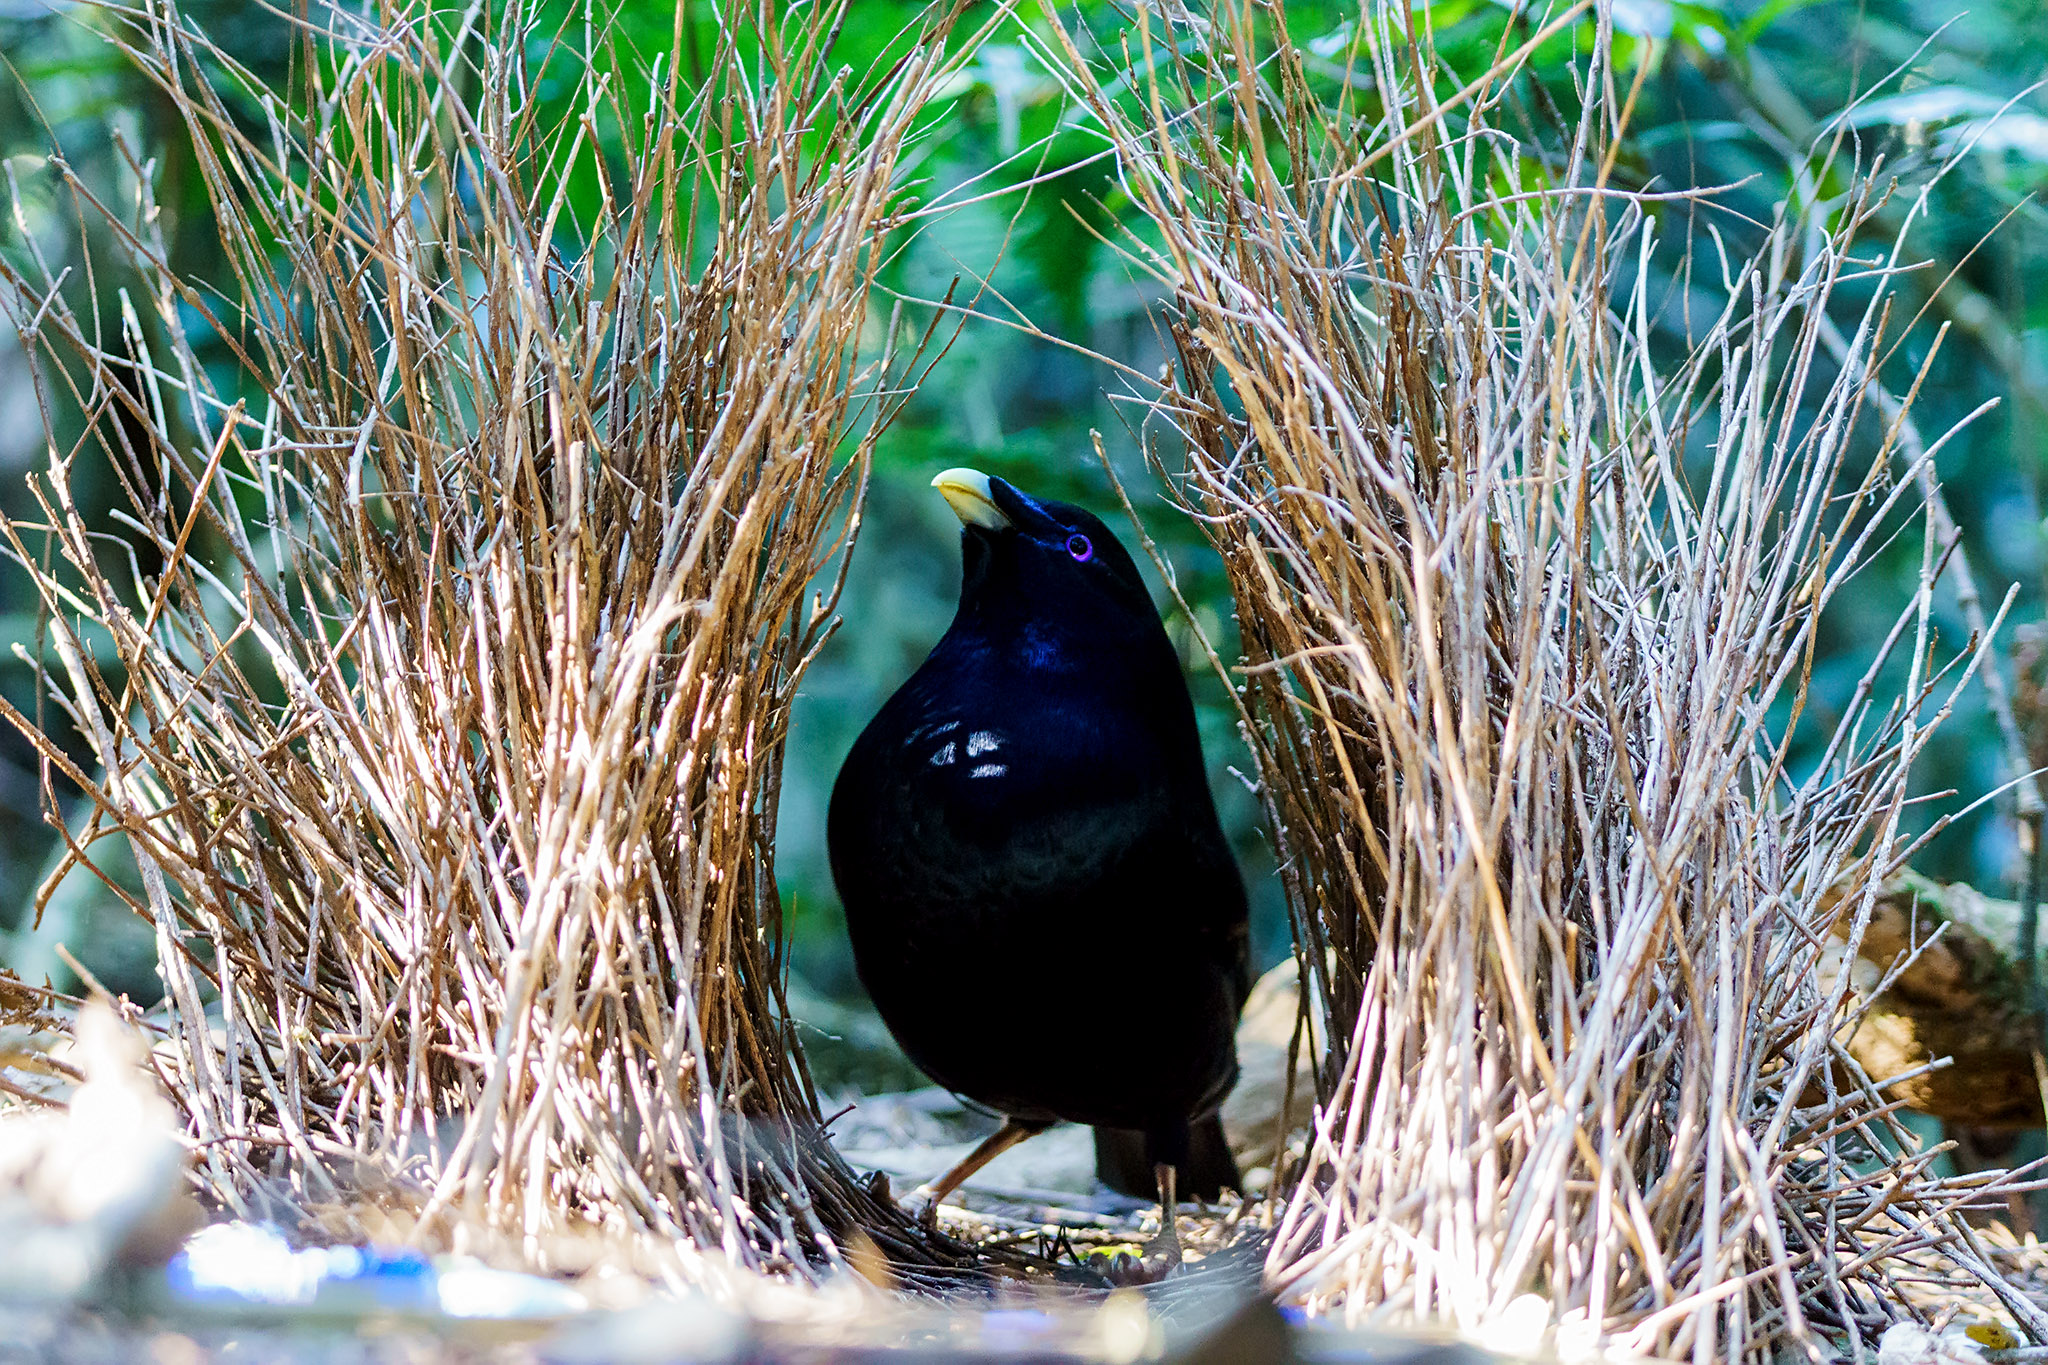 dark bird with blue objects on the ground